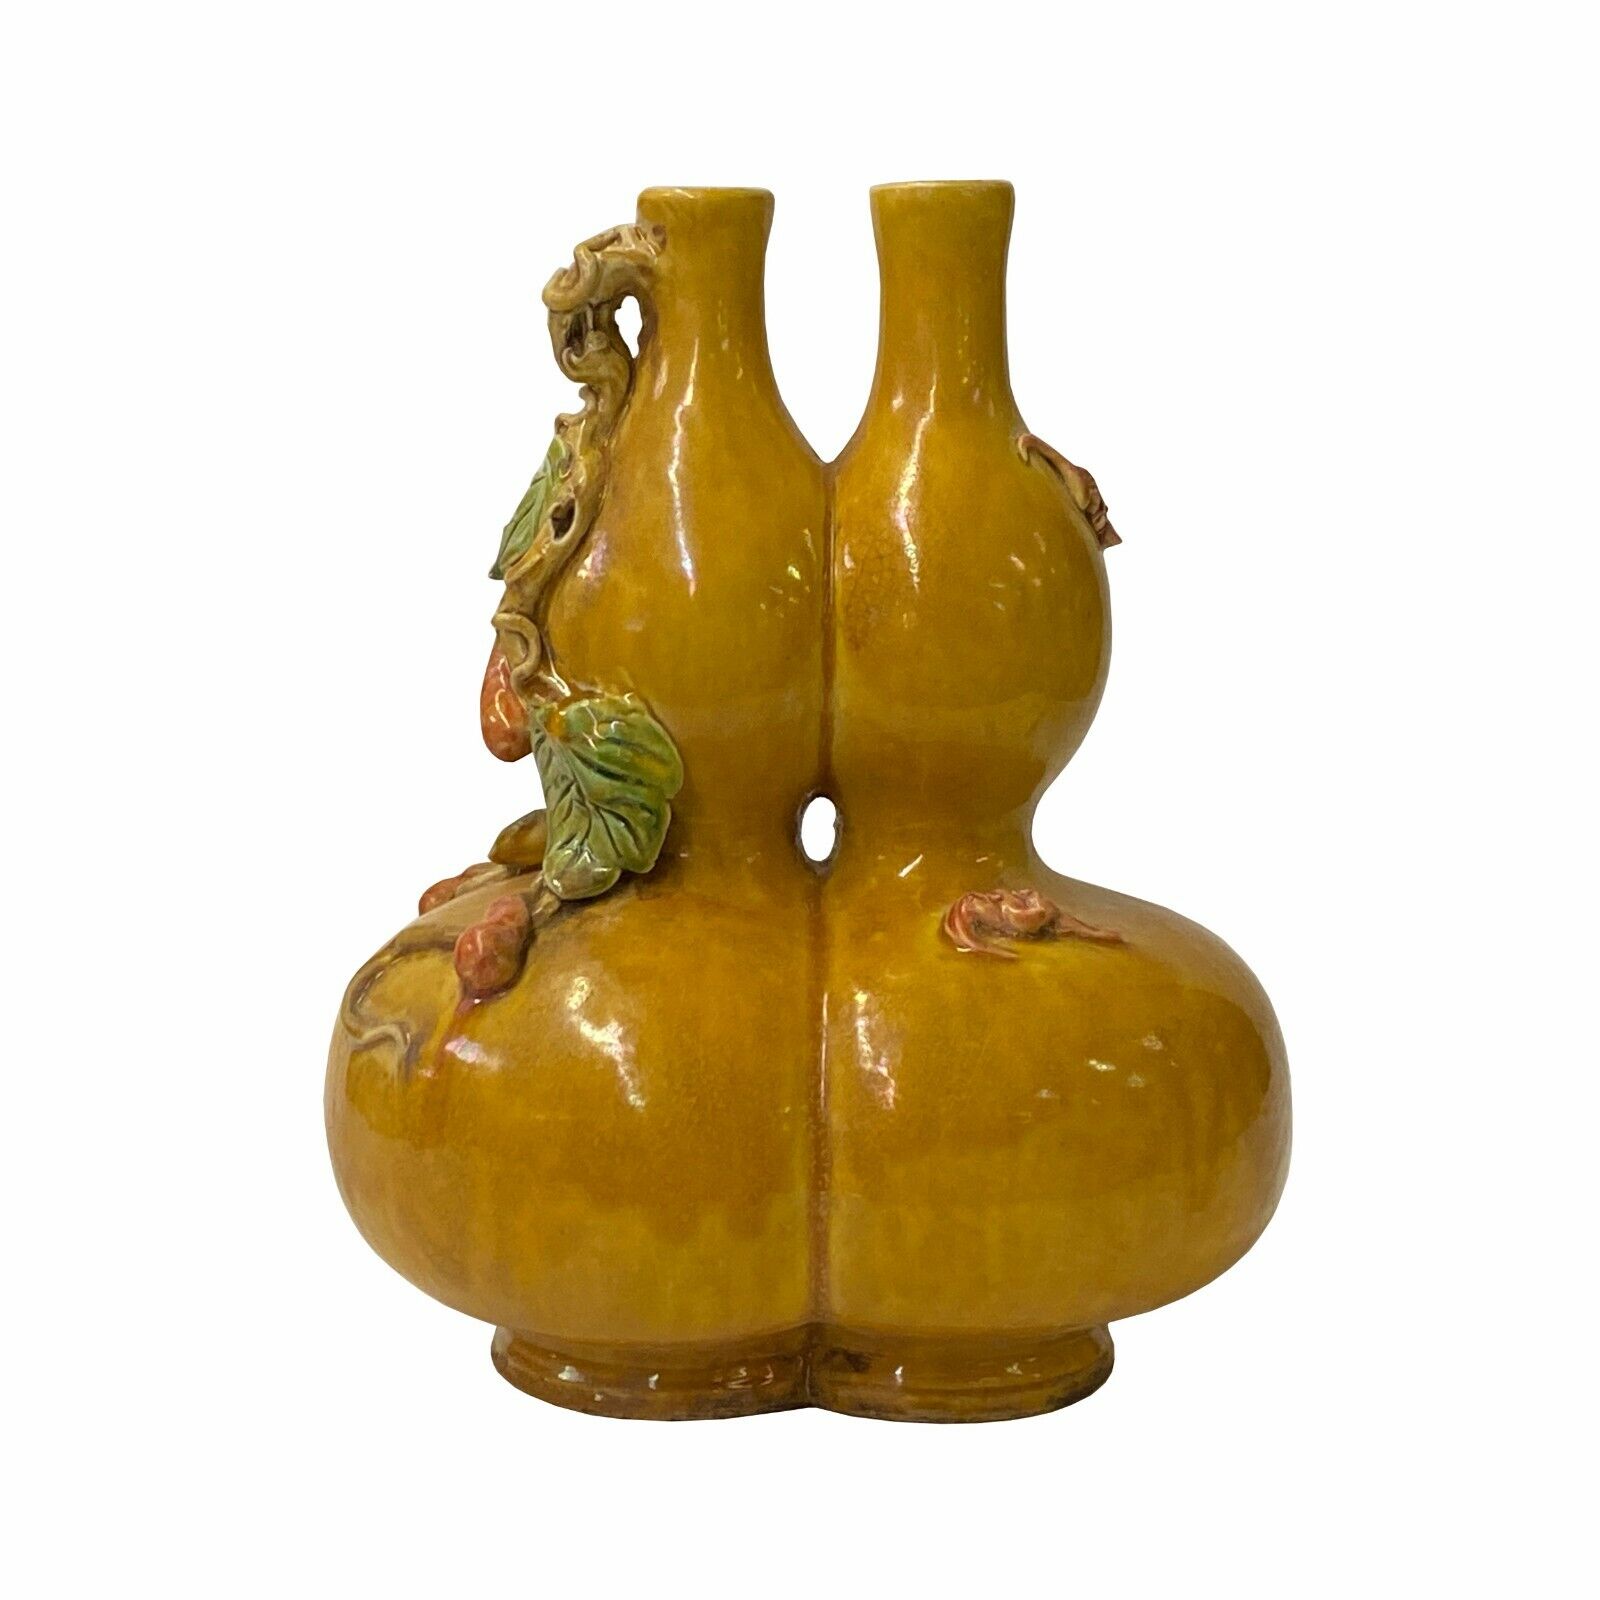 Handmade Chinese Ceramic Distressed Yellow Double Gourd Vase ws1767